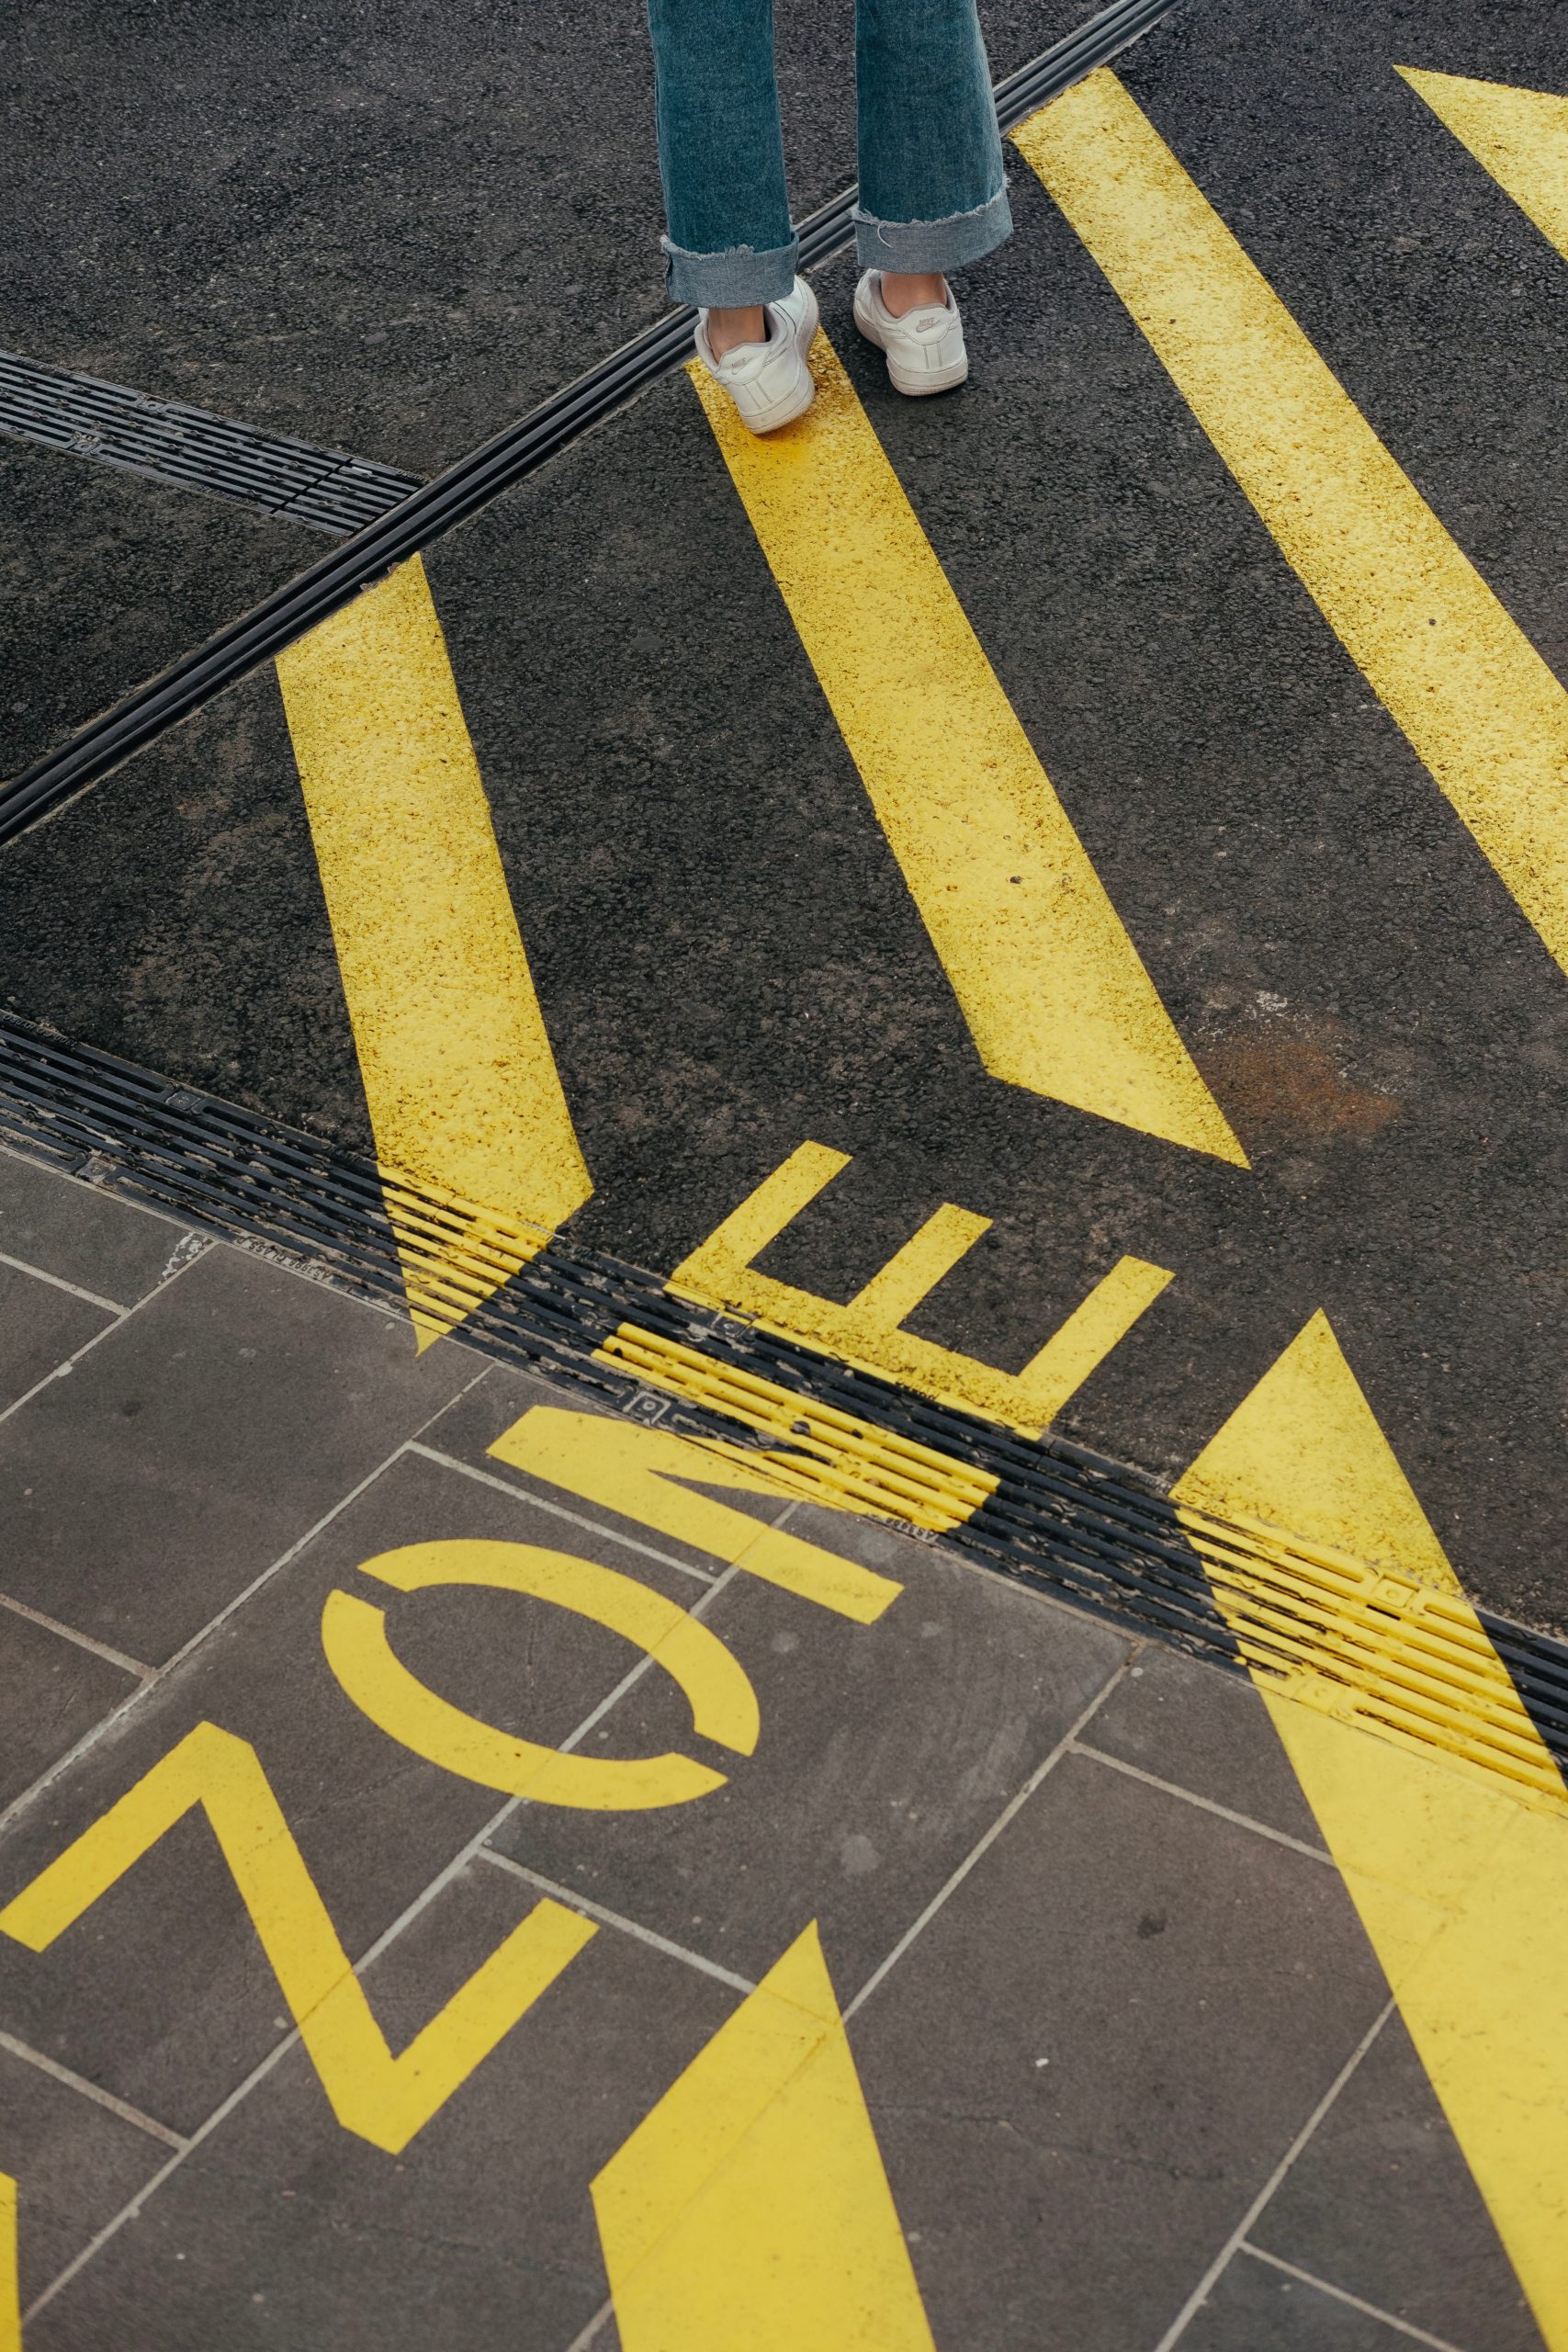 Image of painted lines on the ground, including the word "zone"